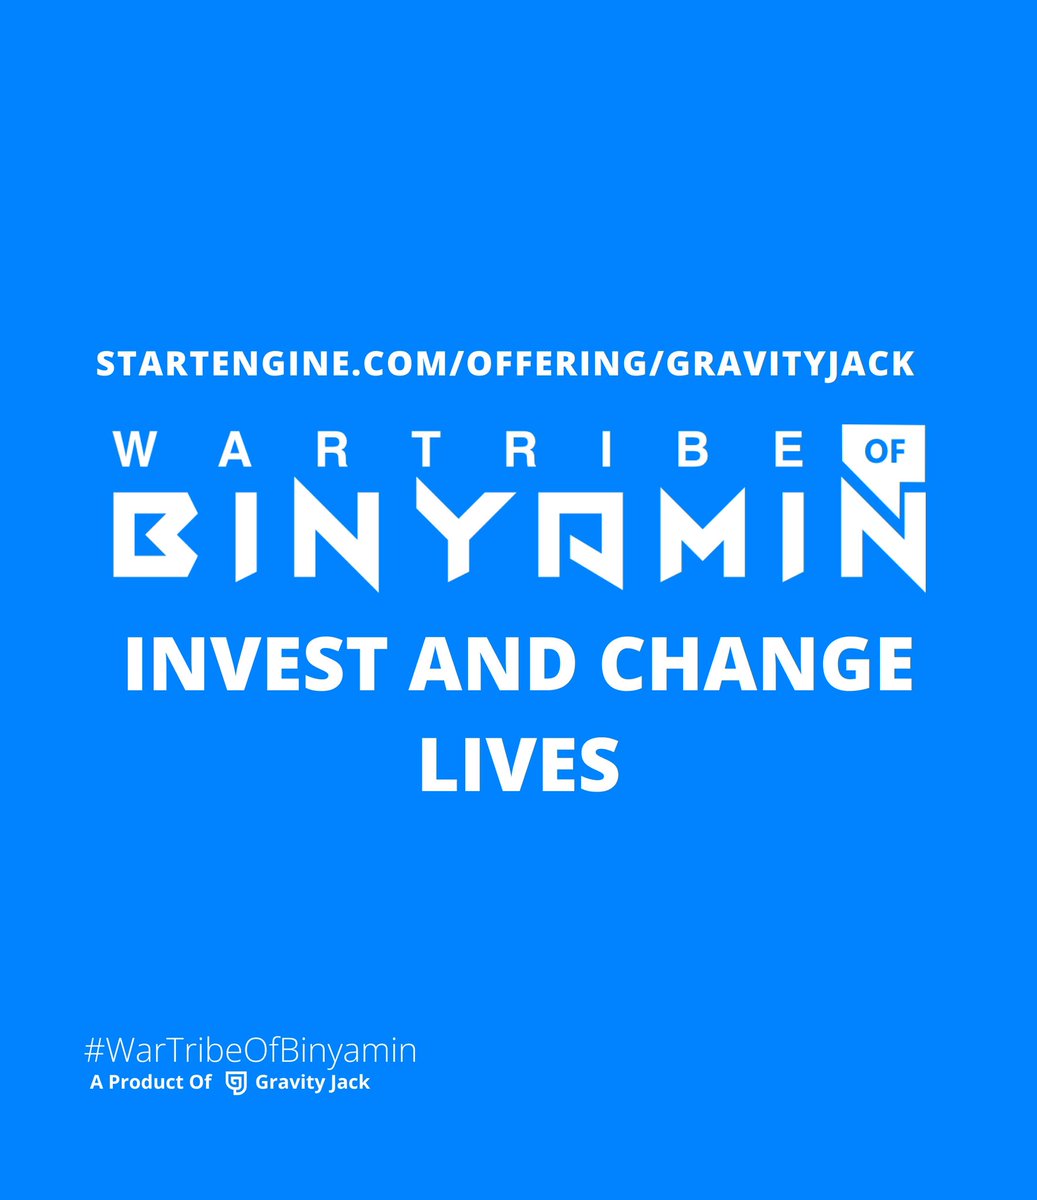 PT 2:

We aim to put the ability to earn income in impoverished nations at the fingertips of the people. Around 60% of people in emerging economies have access to smartphones... imagine they were able to access Wartribe Of Binyamin!

#WartribeOfBinyamin #GeoGaming #ARRevolution